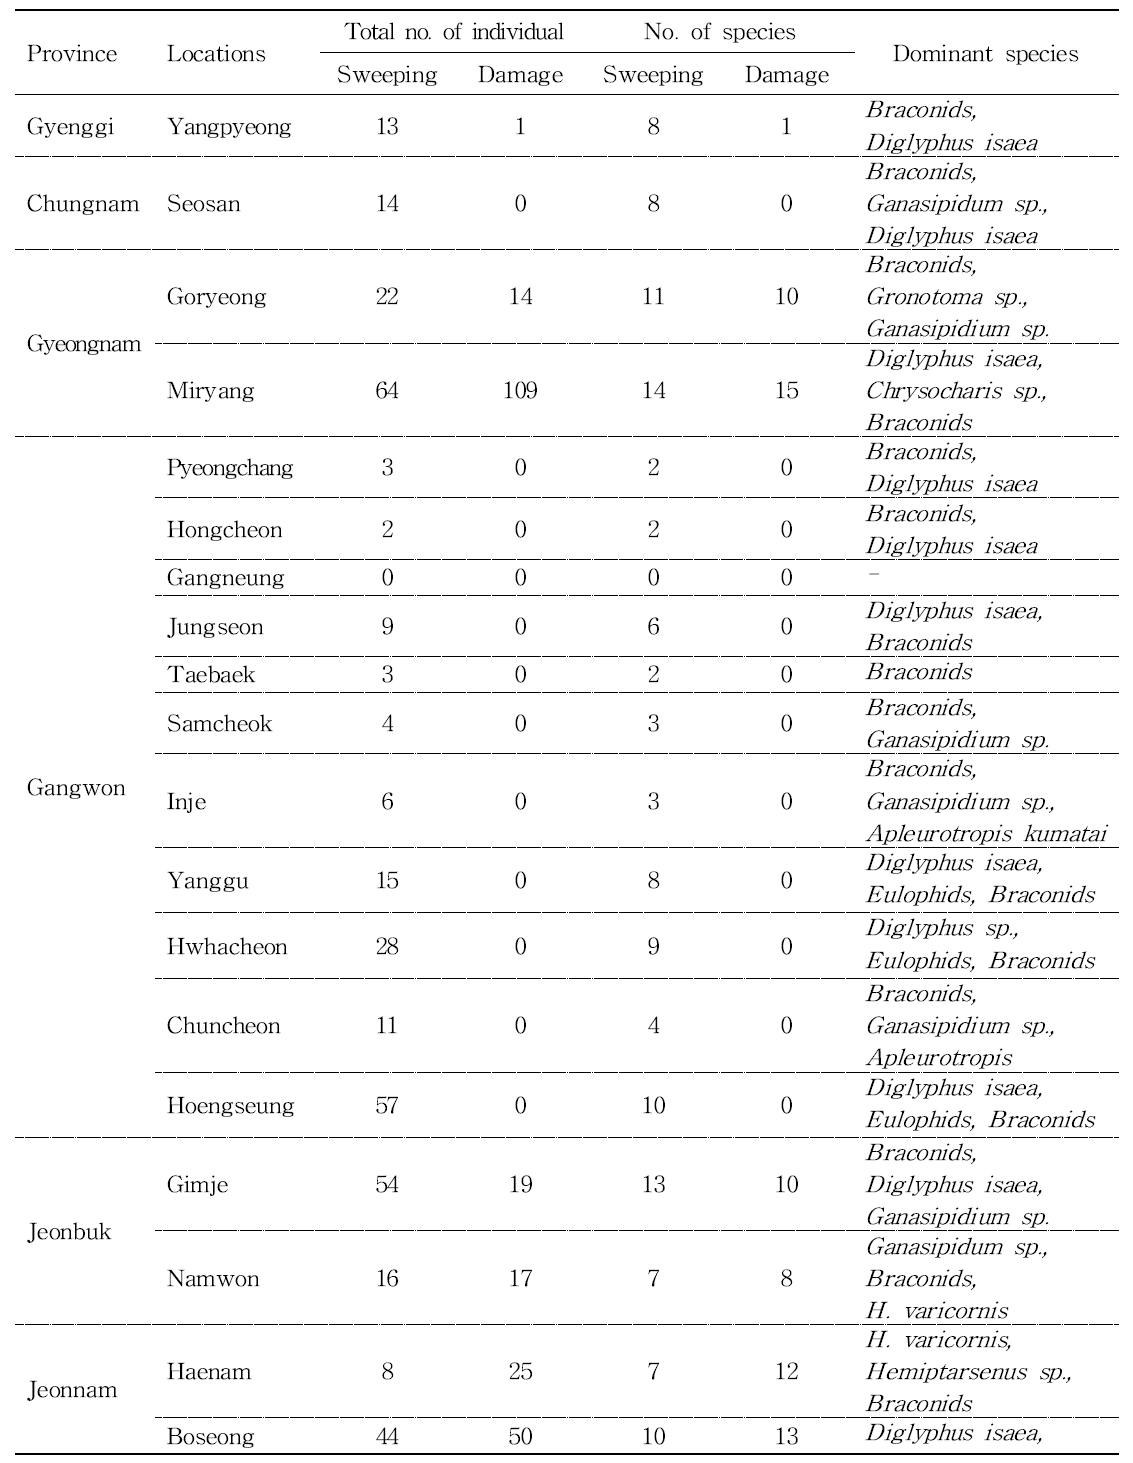 List of total no. of individuals and species of parasitoids collected by sweeping and damage samples